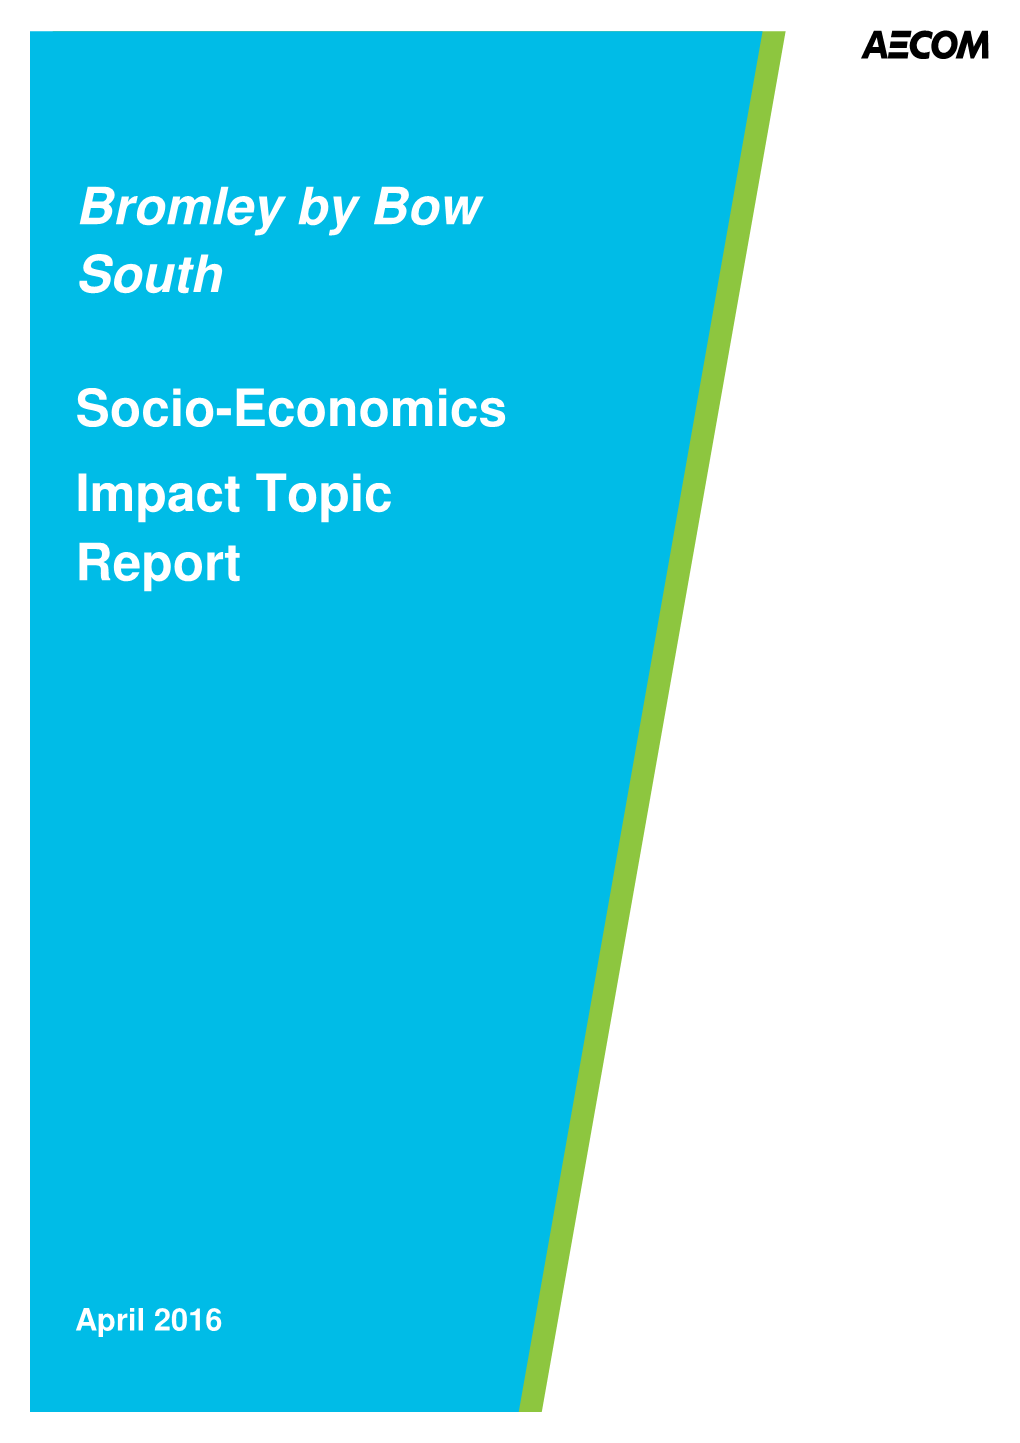 Bromley by Bow South Socio-Economics Impact Topic Report